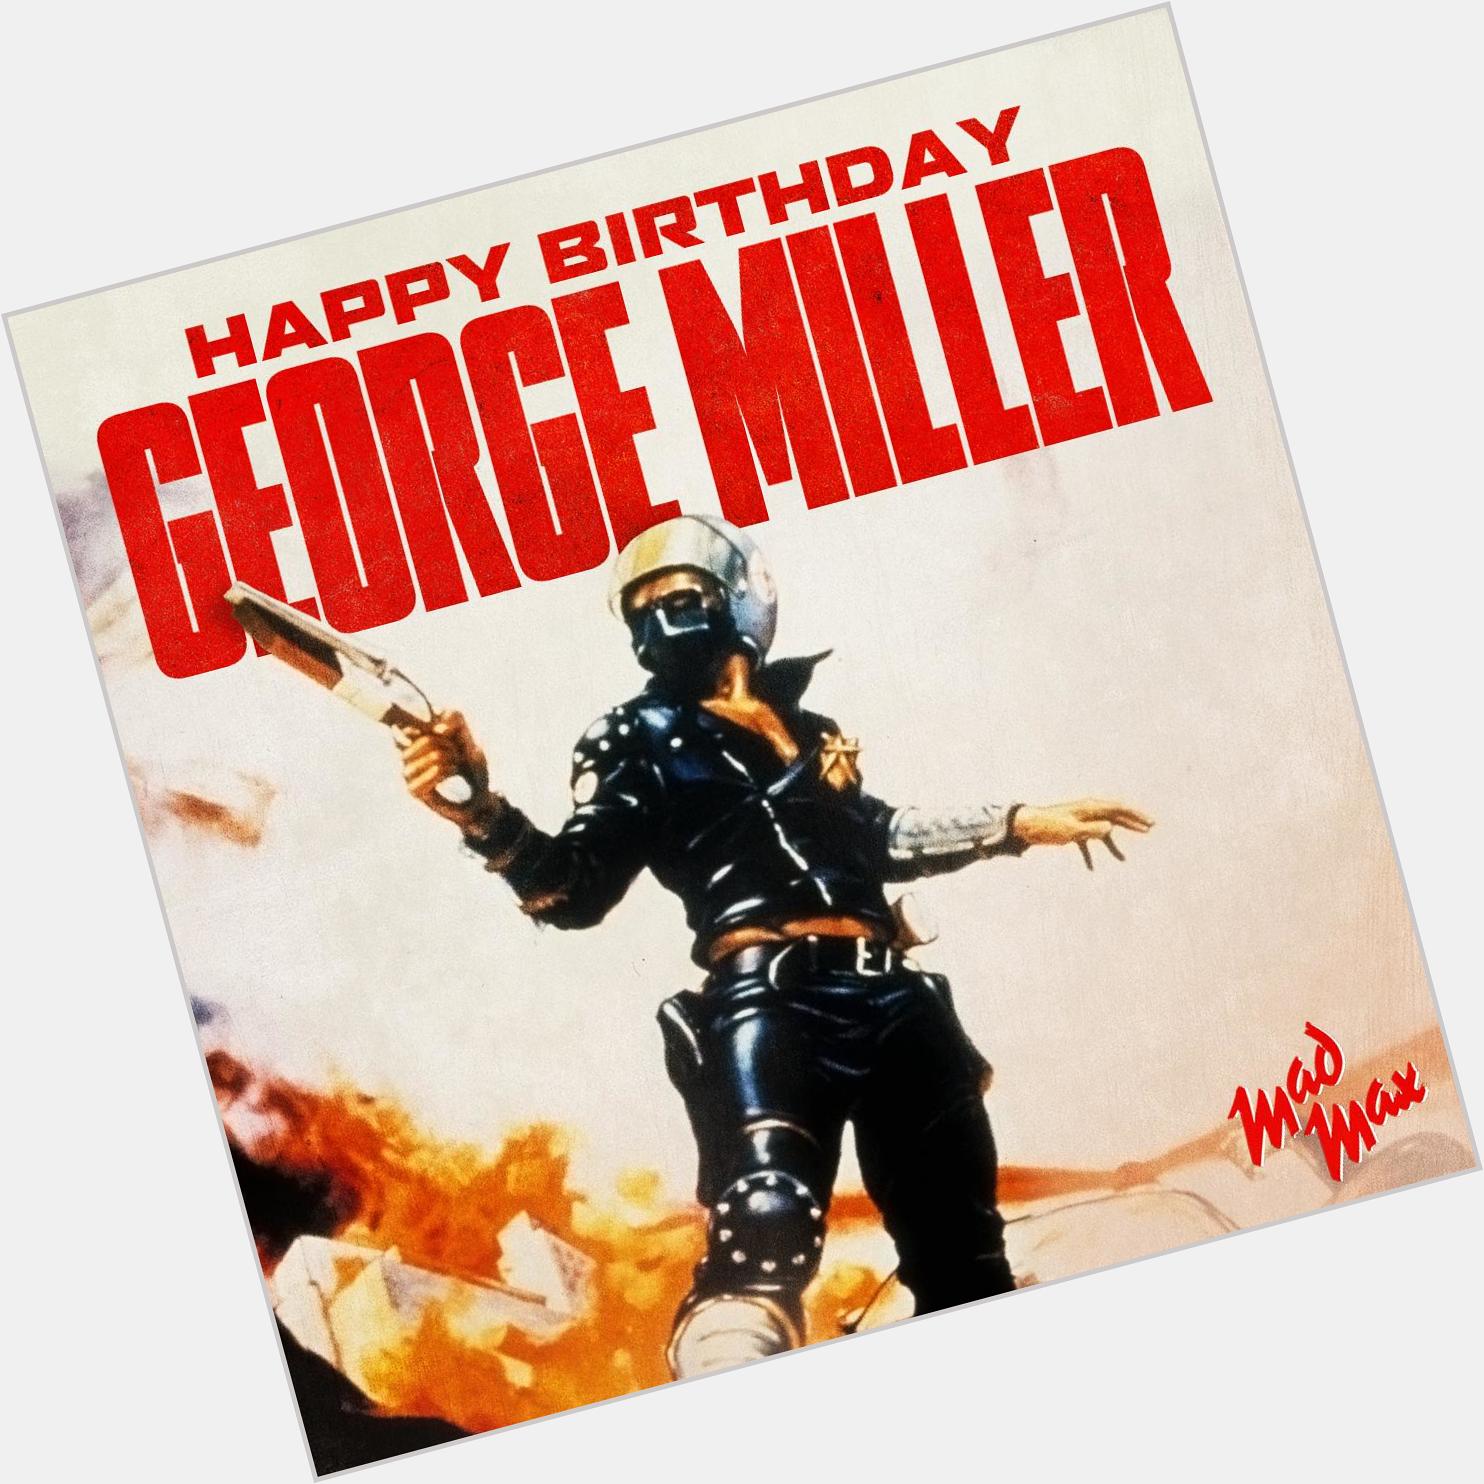 Happy birthday to the visionary director and writer behind George Miller!  